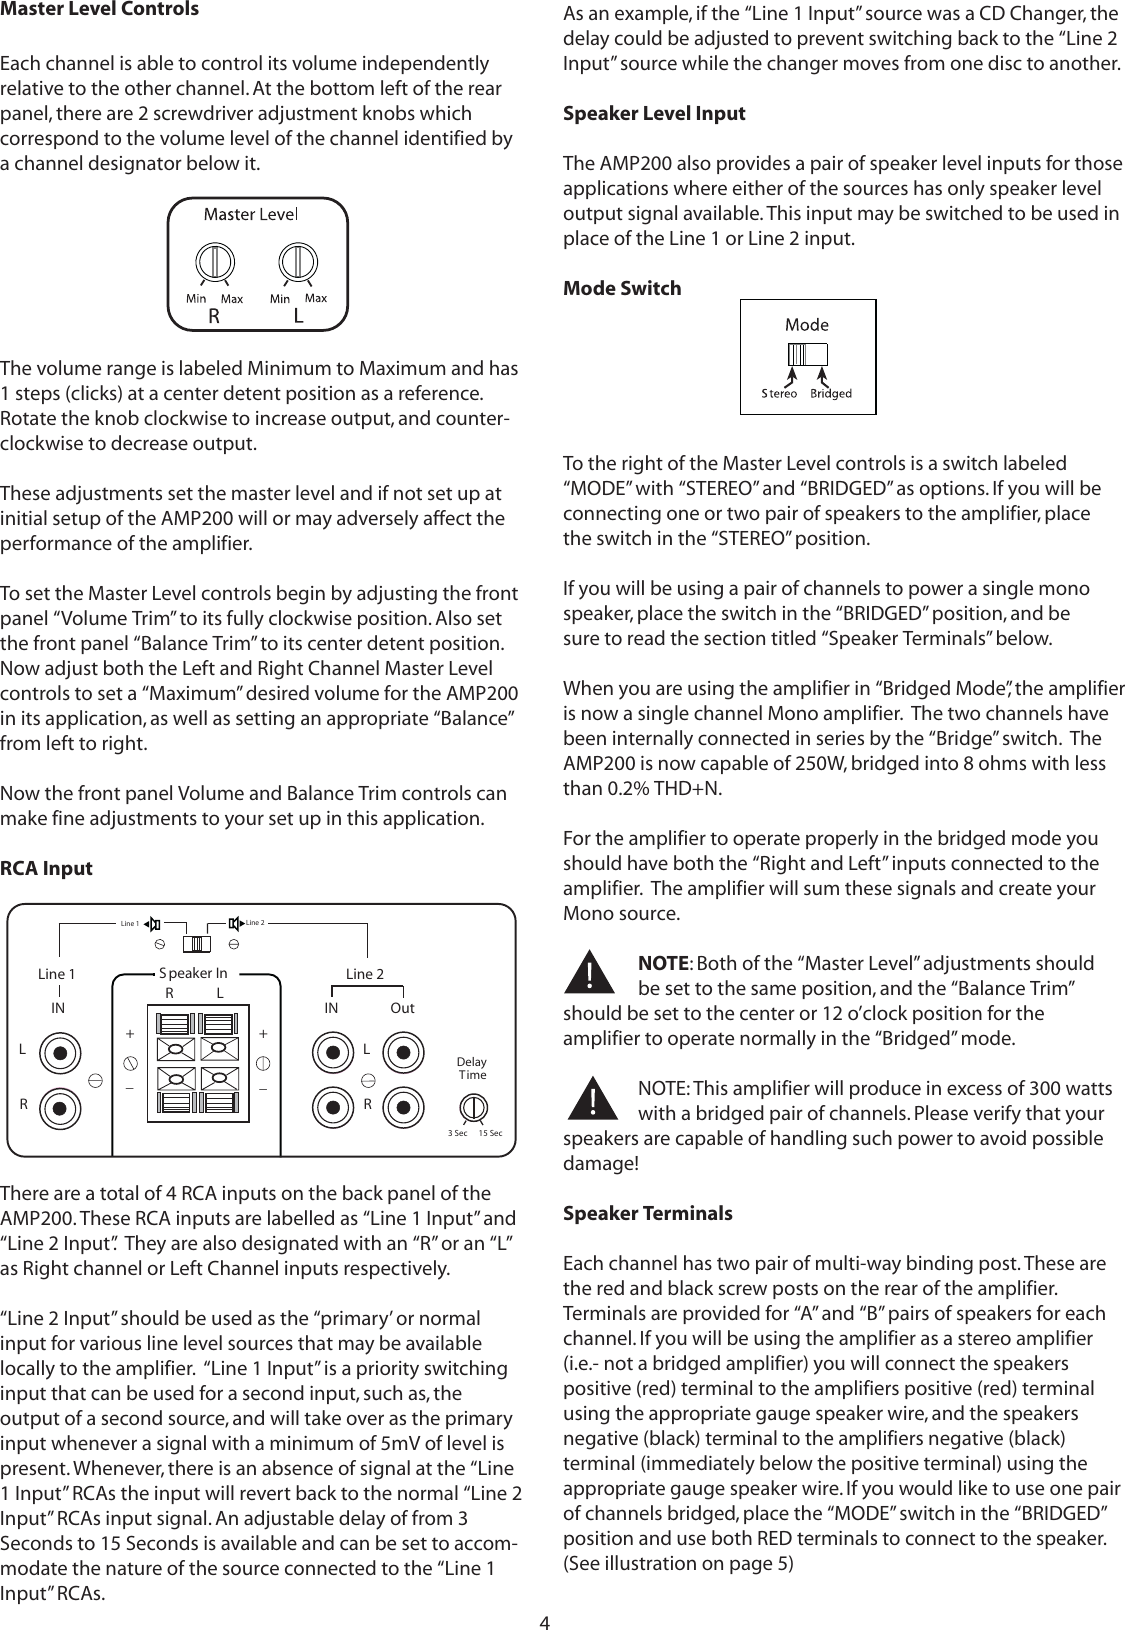 Page 4 of 6 - Audiosource Audiosource-Audiosource-Stereo-Amplifier-Amp200-Users-Manual- Page-1  Audiosource-audiosource-stereo-amplifier-amp200-users-manual